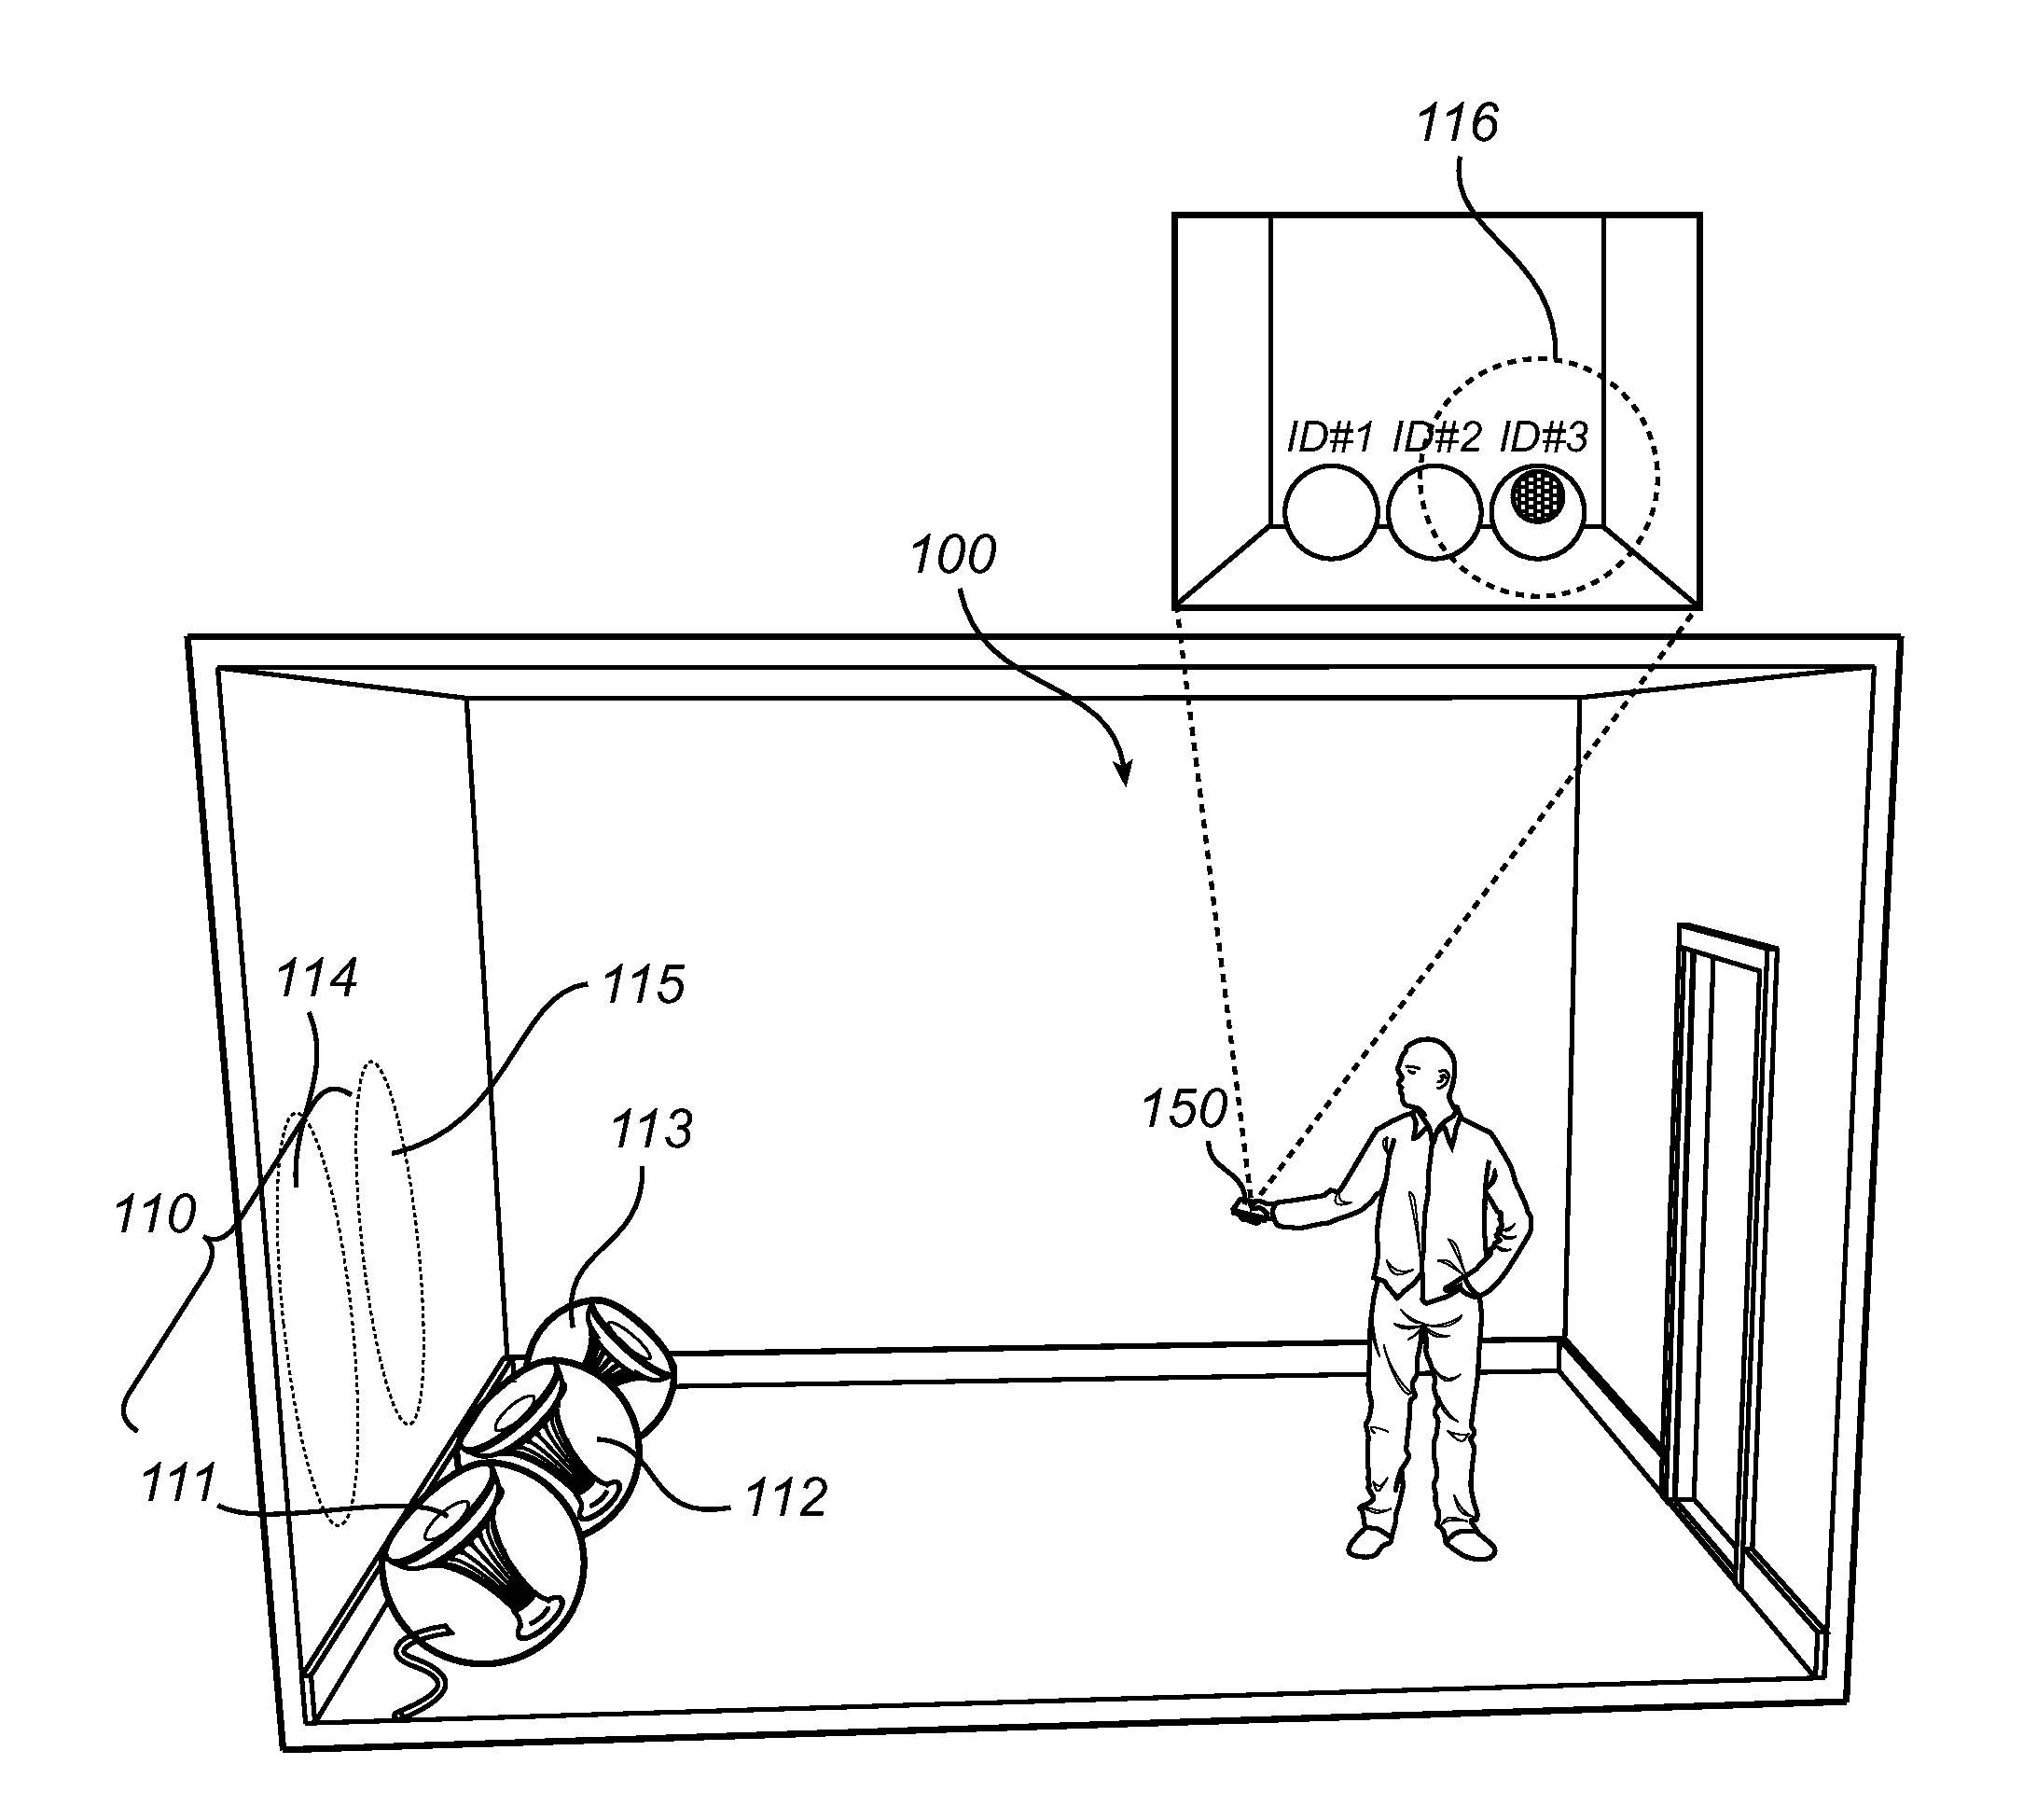 Light detection system and method